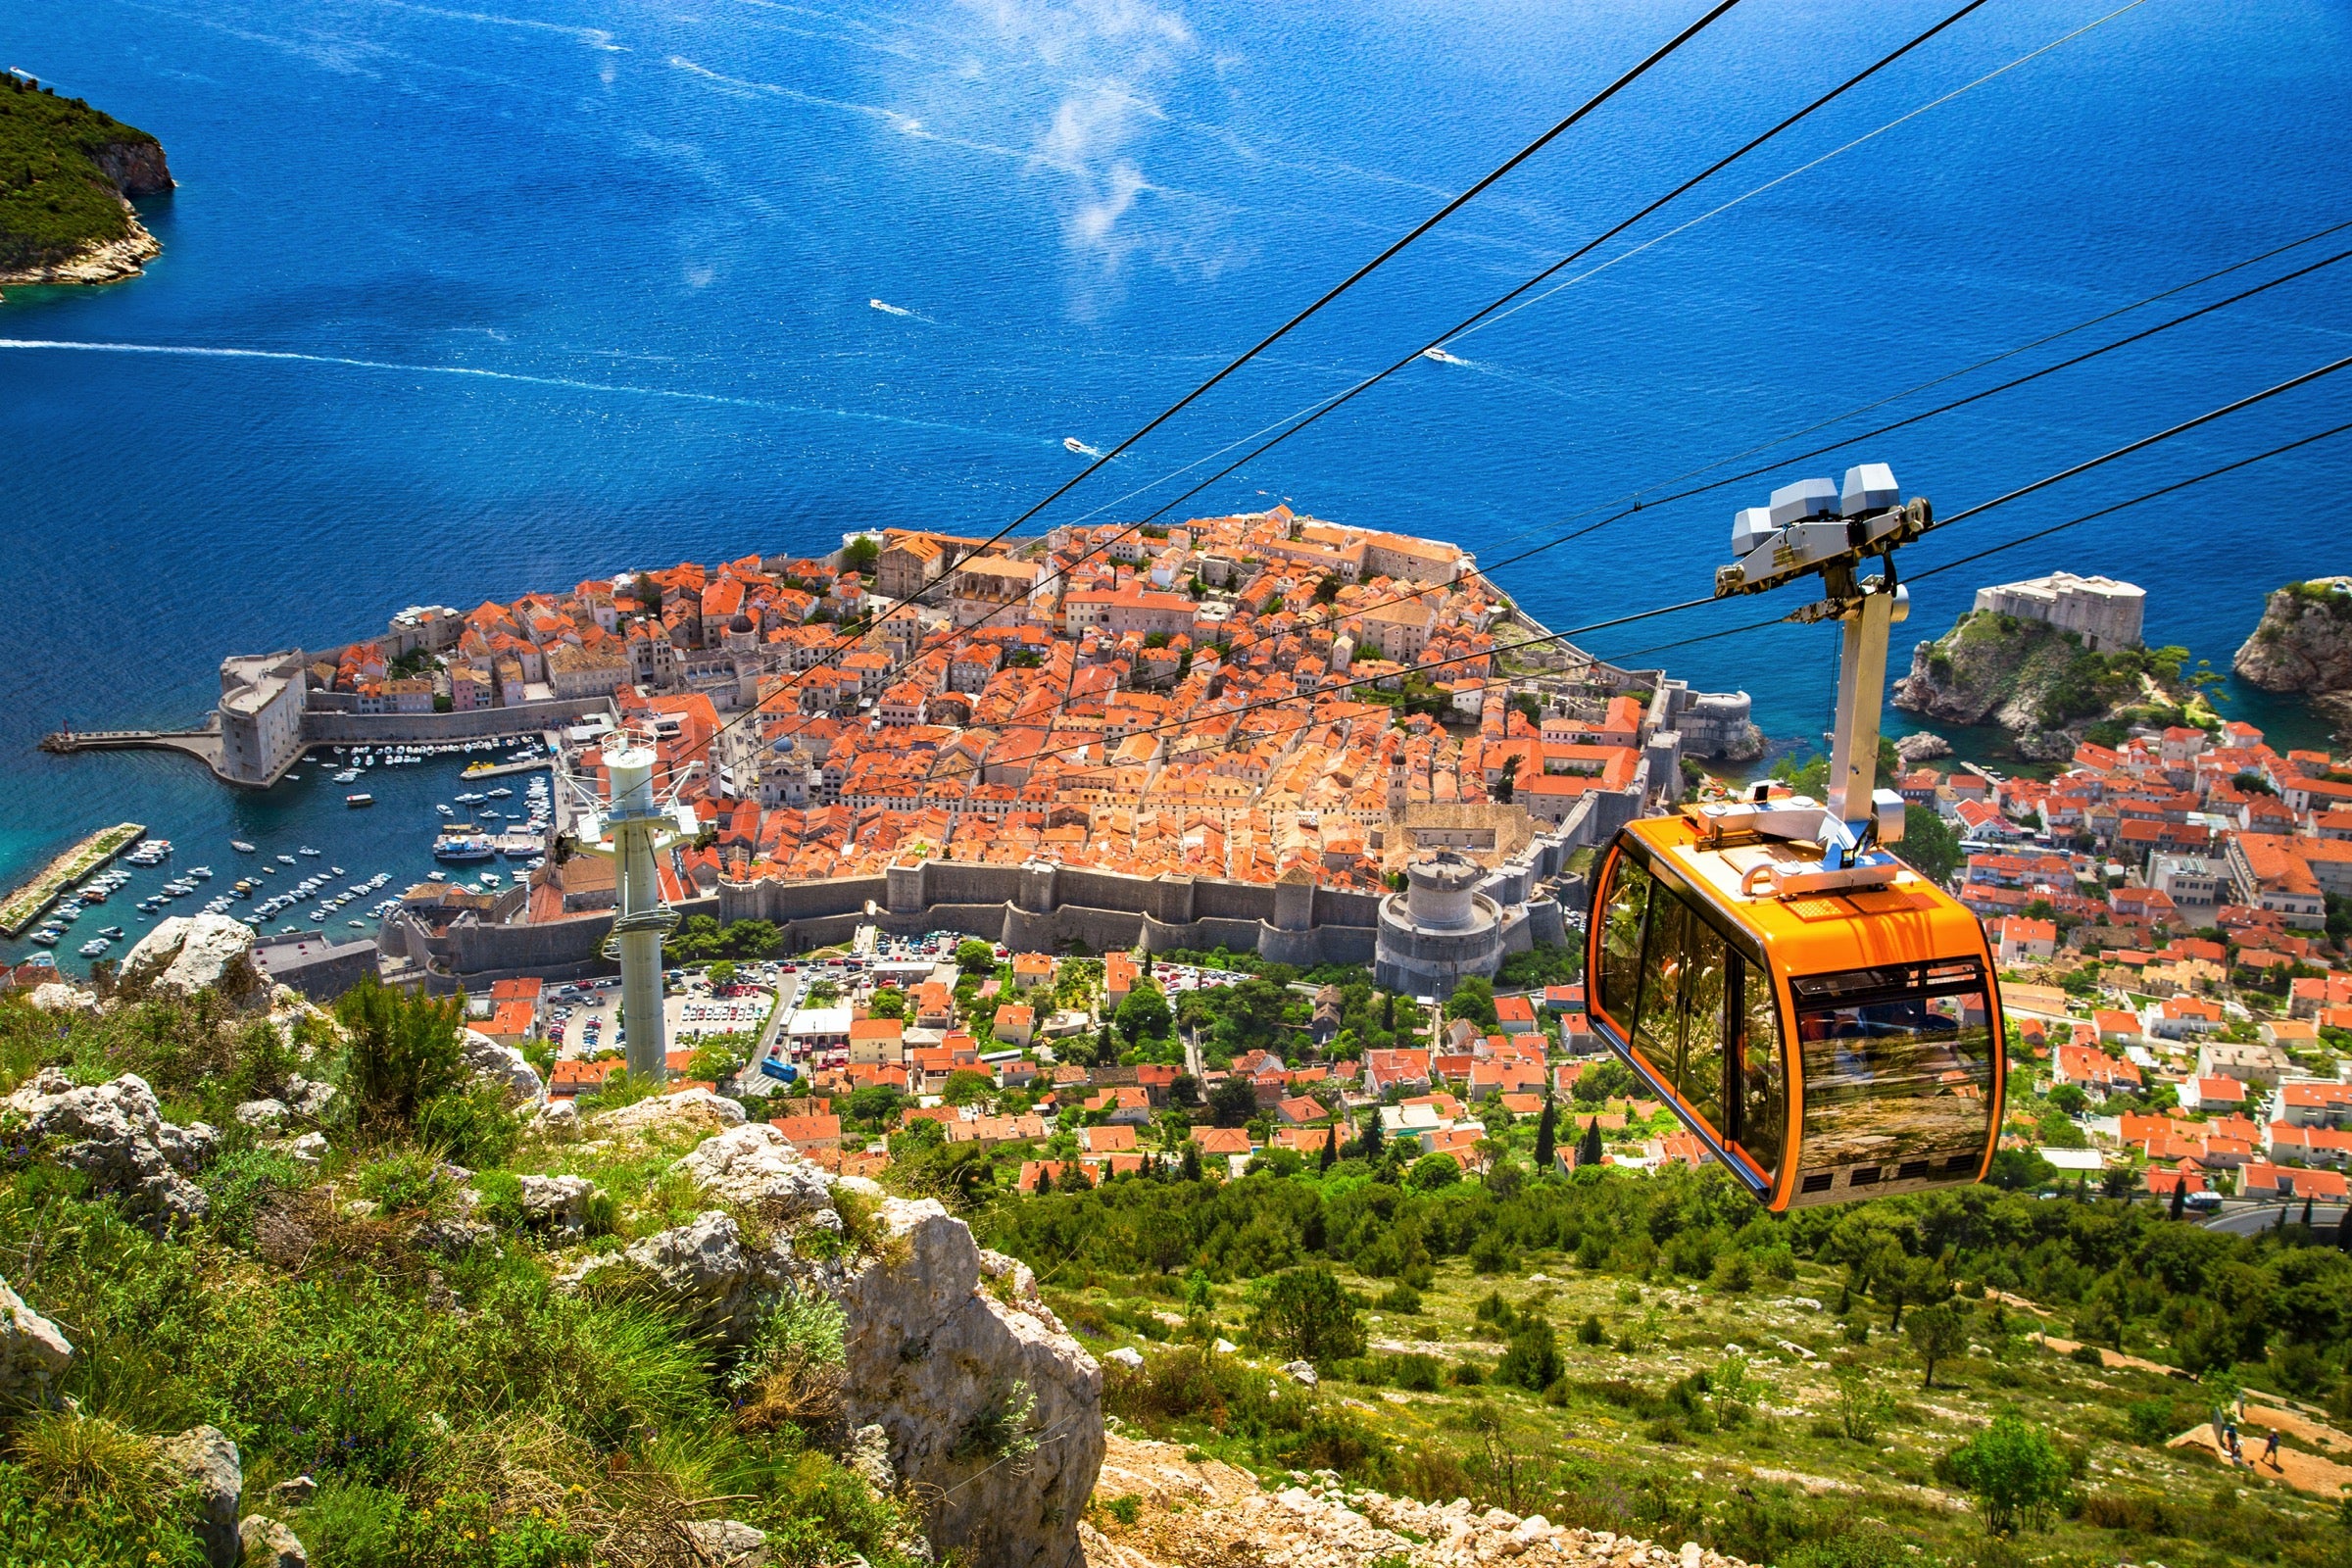 Aerial view of Dubrovnik's old town with a cable car